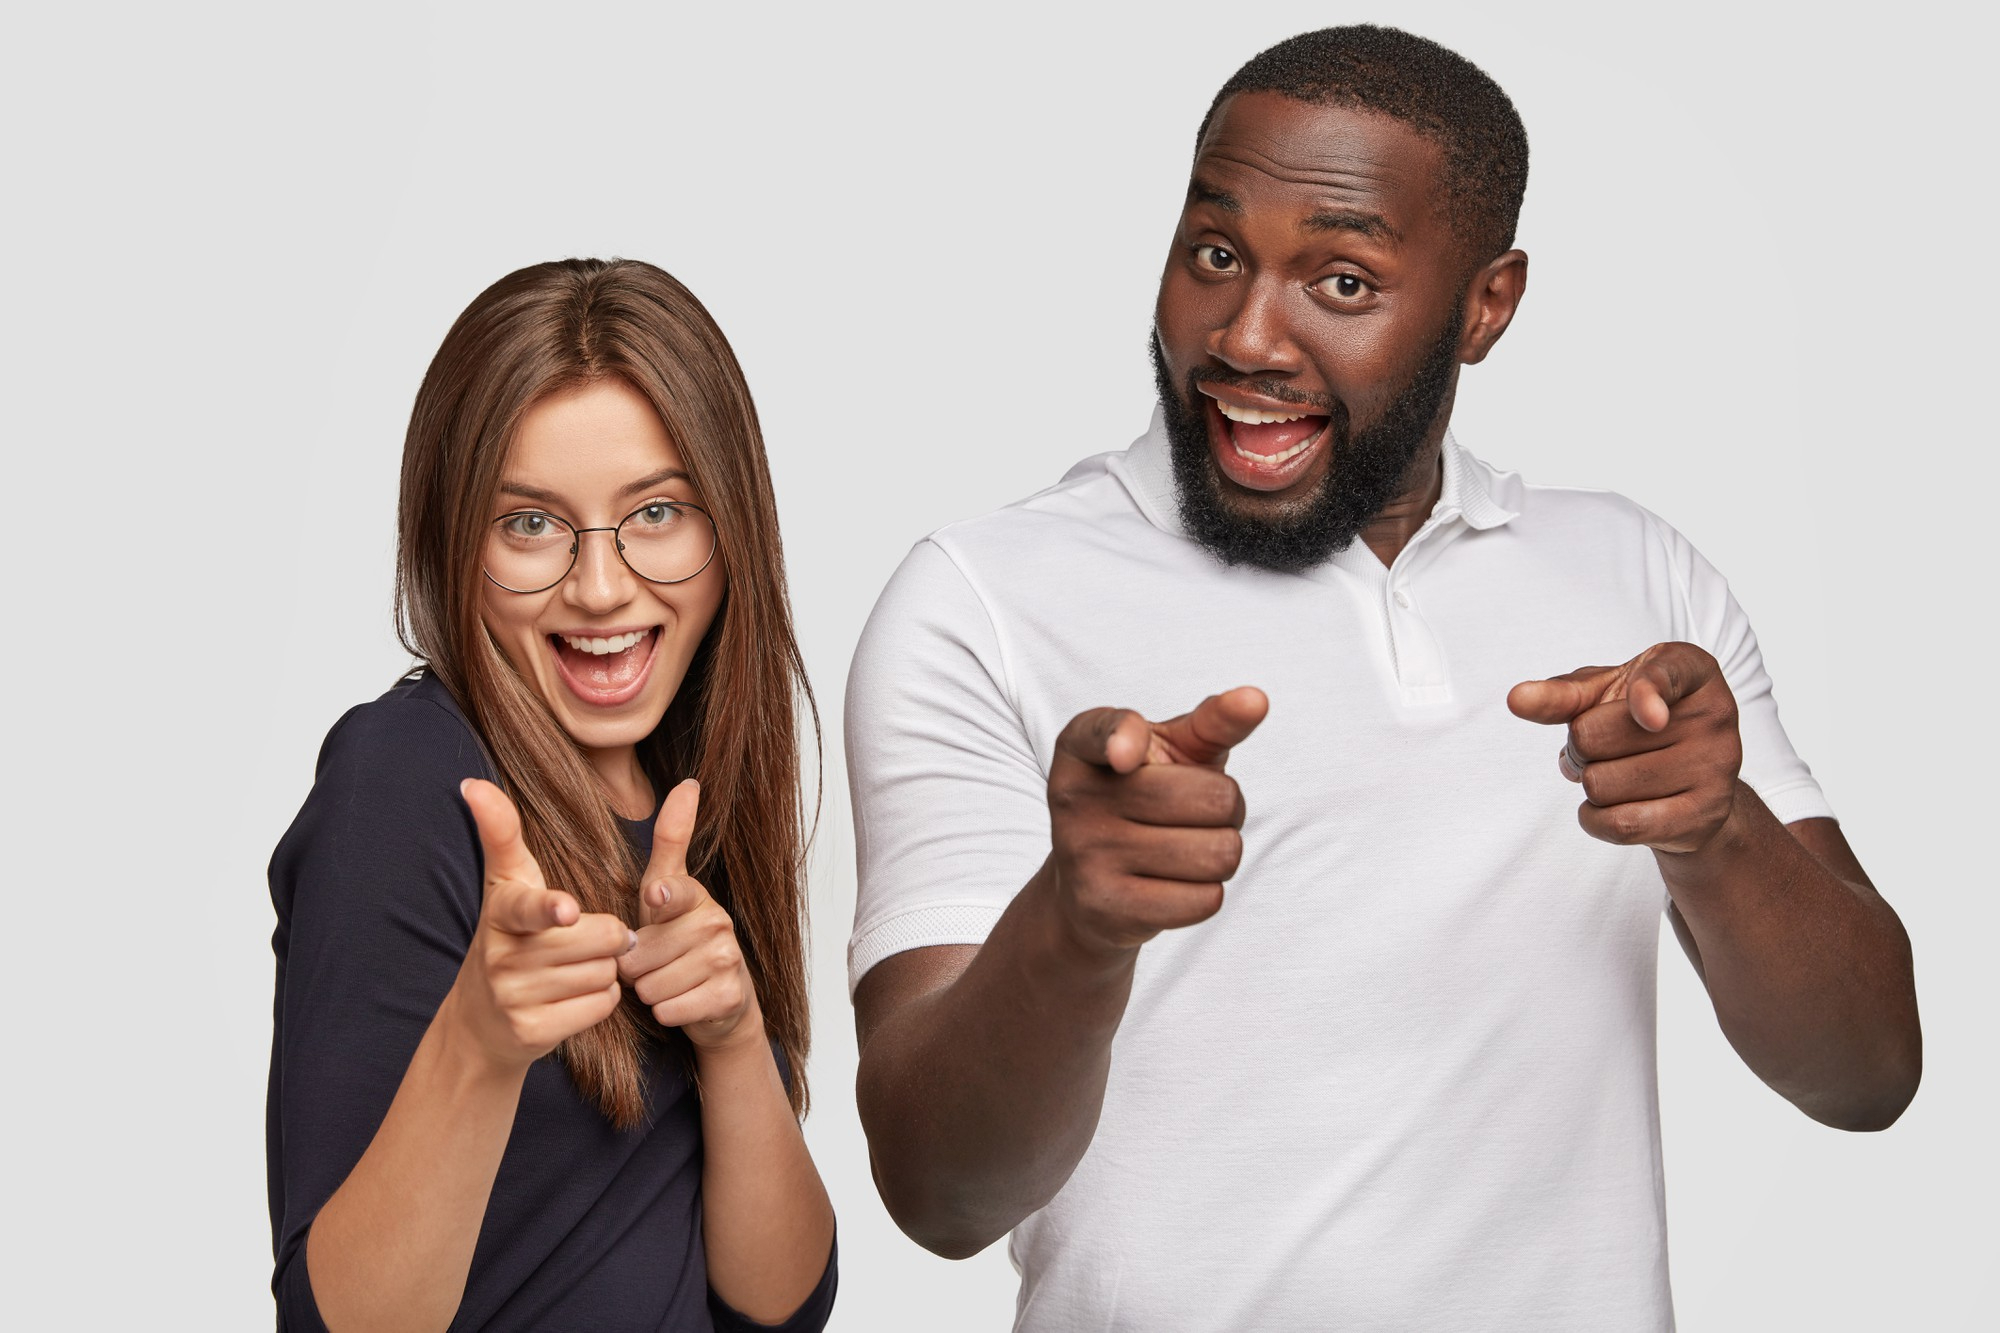 positive-girl-guy-different-races-make-finger-gun-gesture-smile-positively-express-their-choice